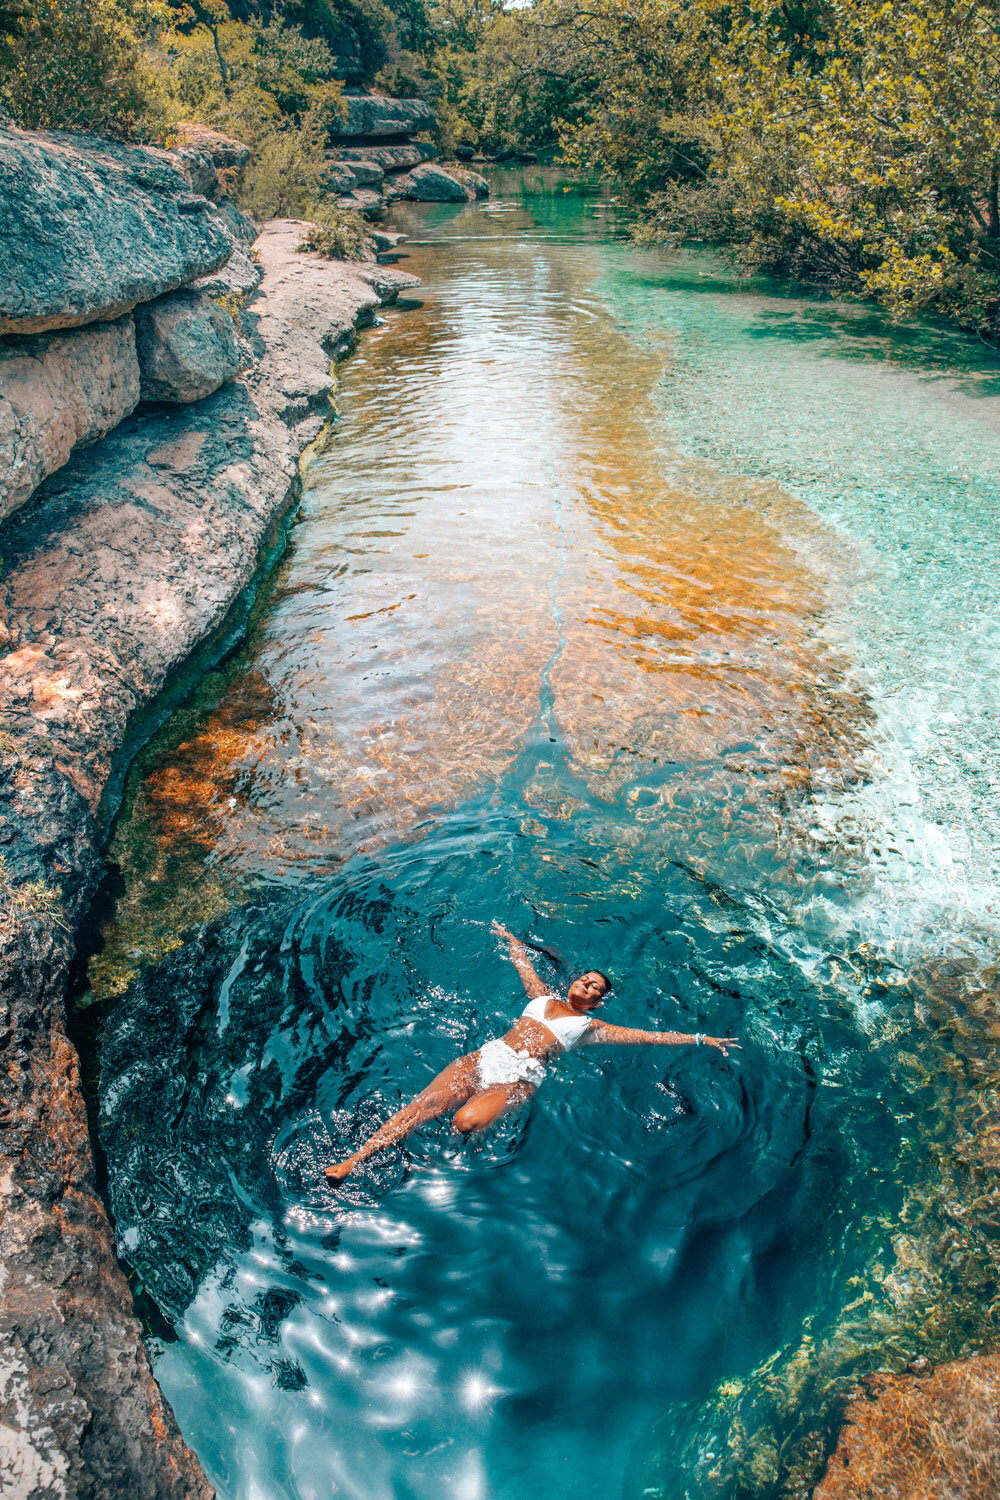 How To Visit Jacob's Well Natural Area in Wimberley, Texas - readysetjetset